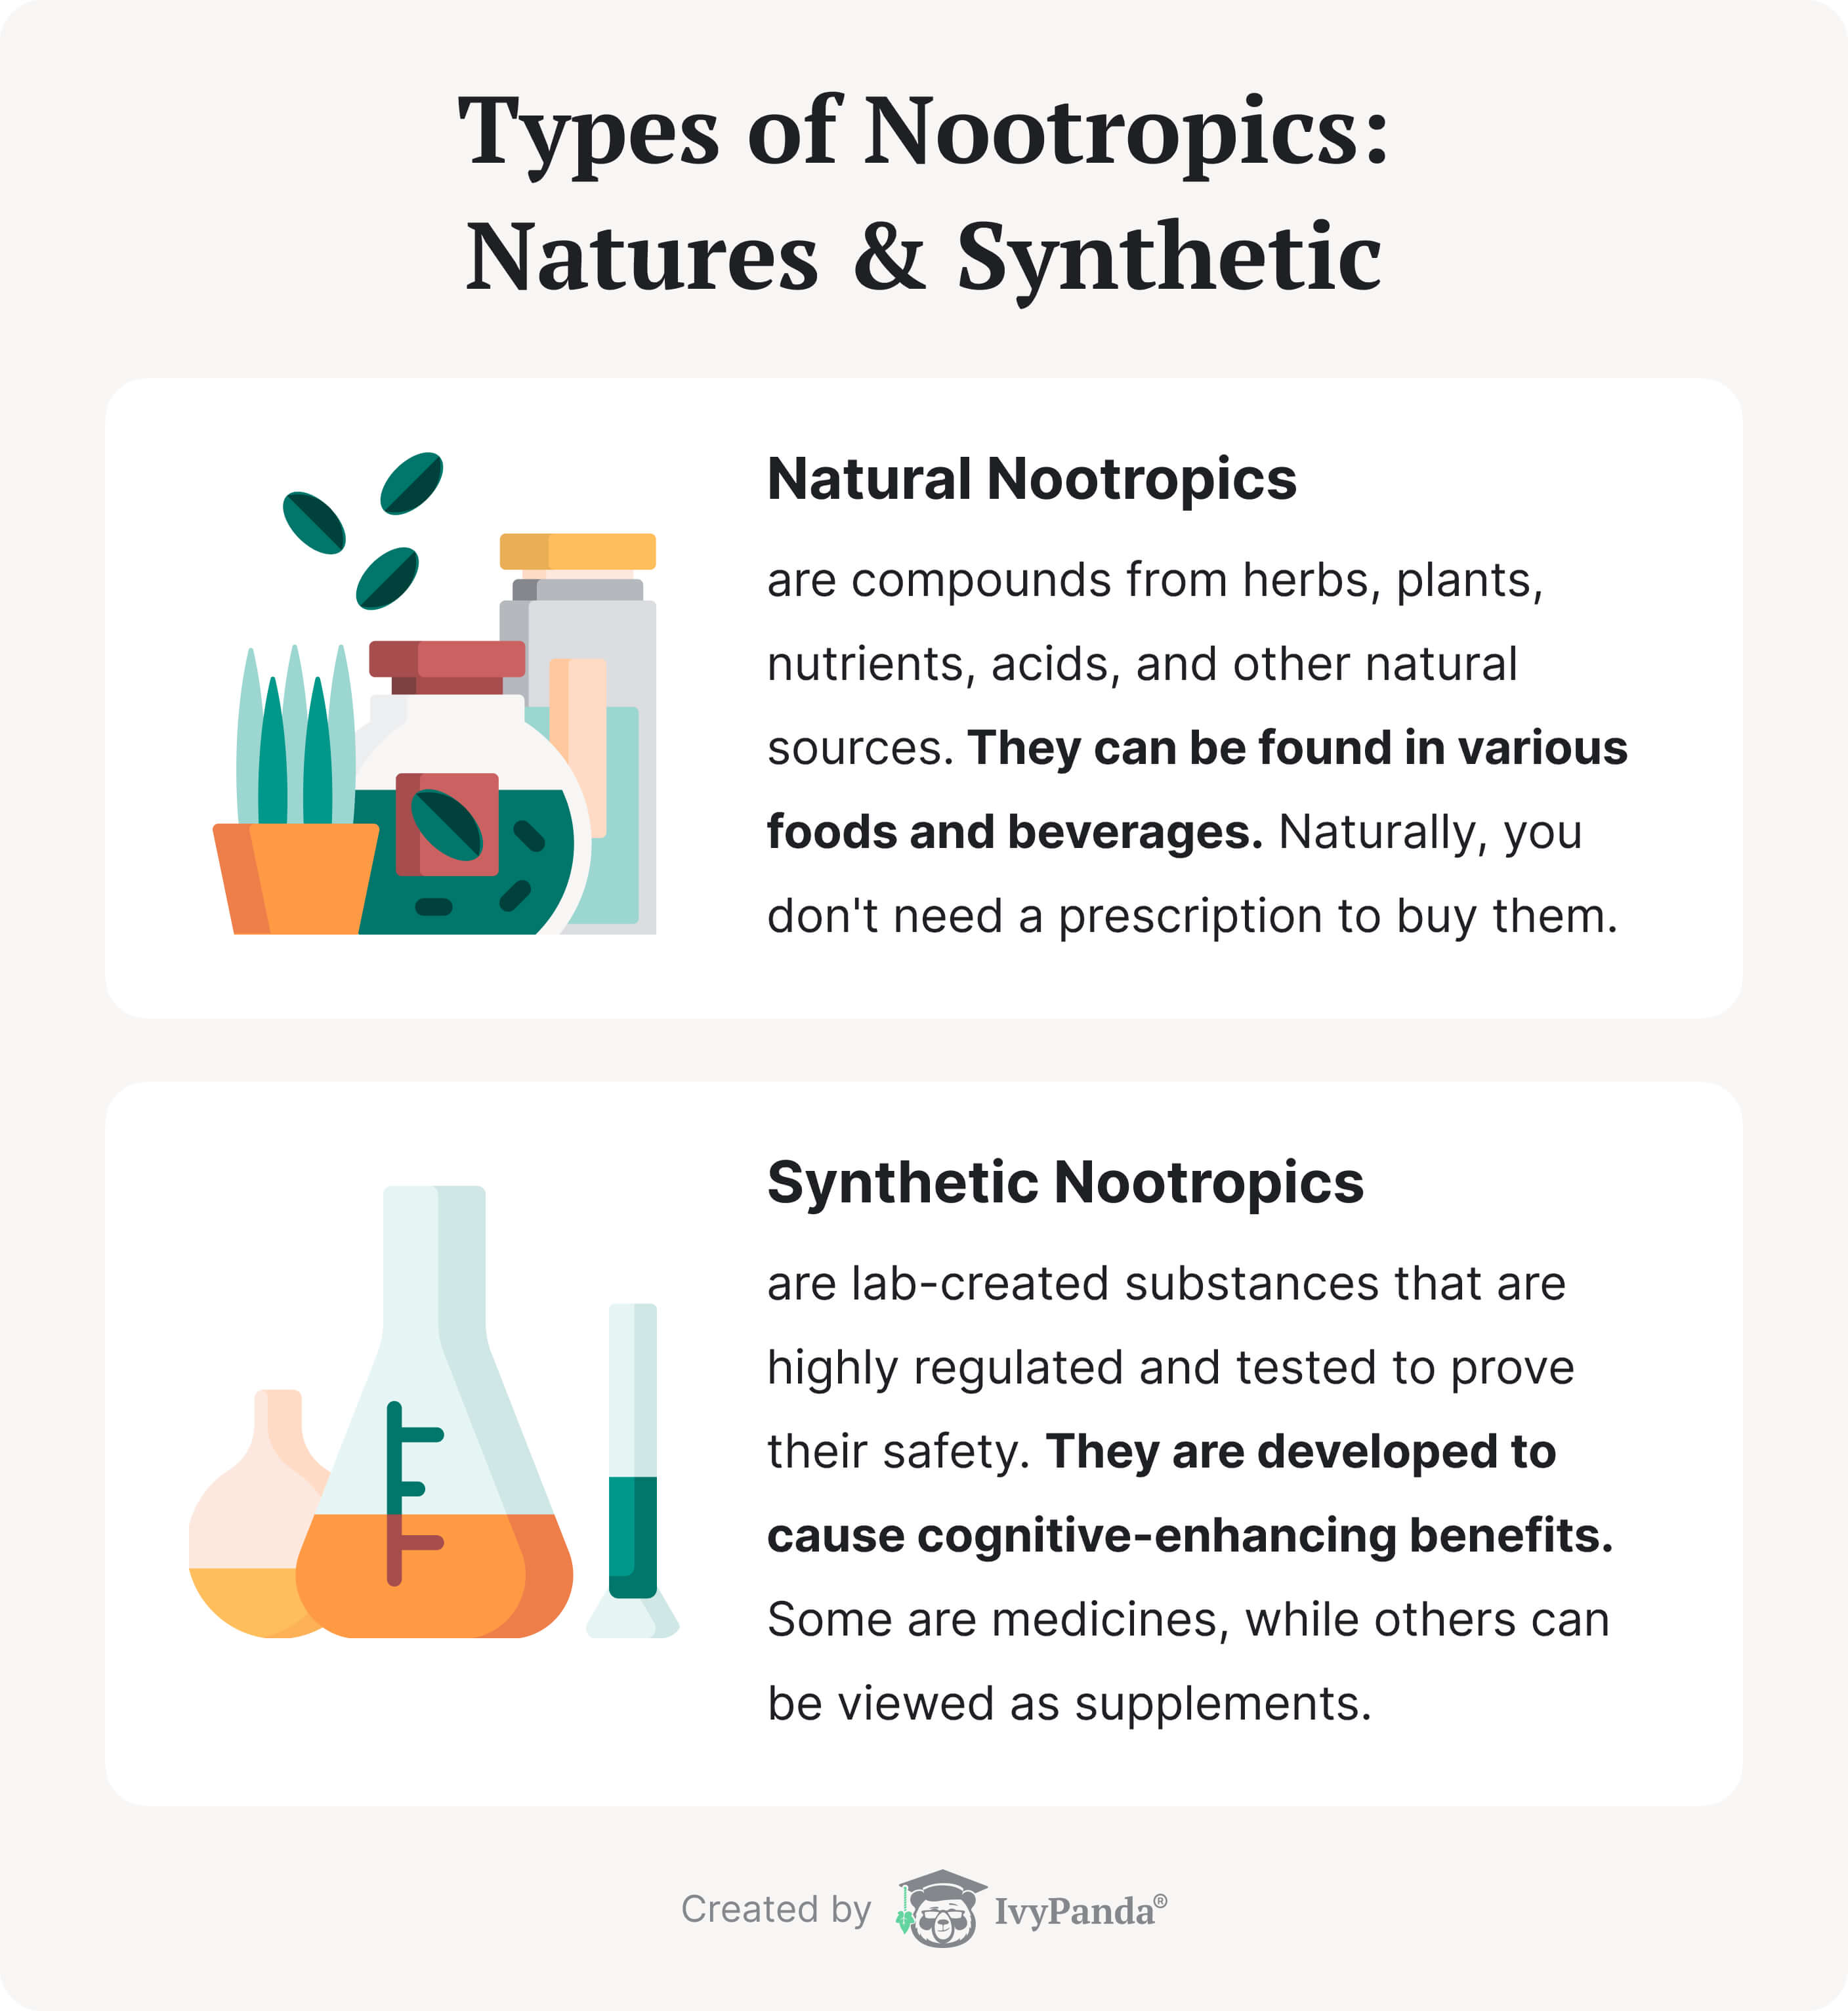 Natural and synthetic nootropics.